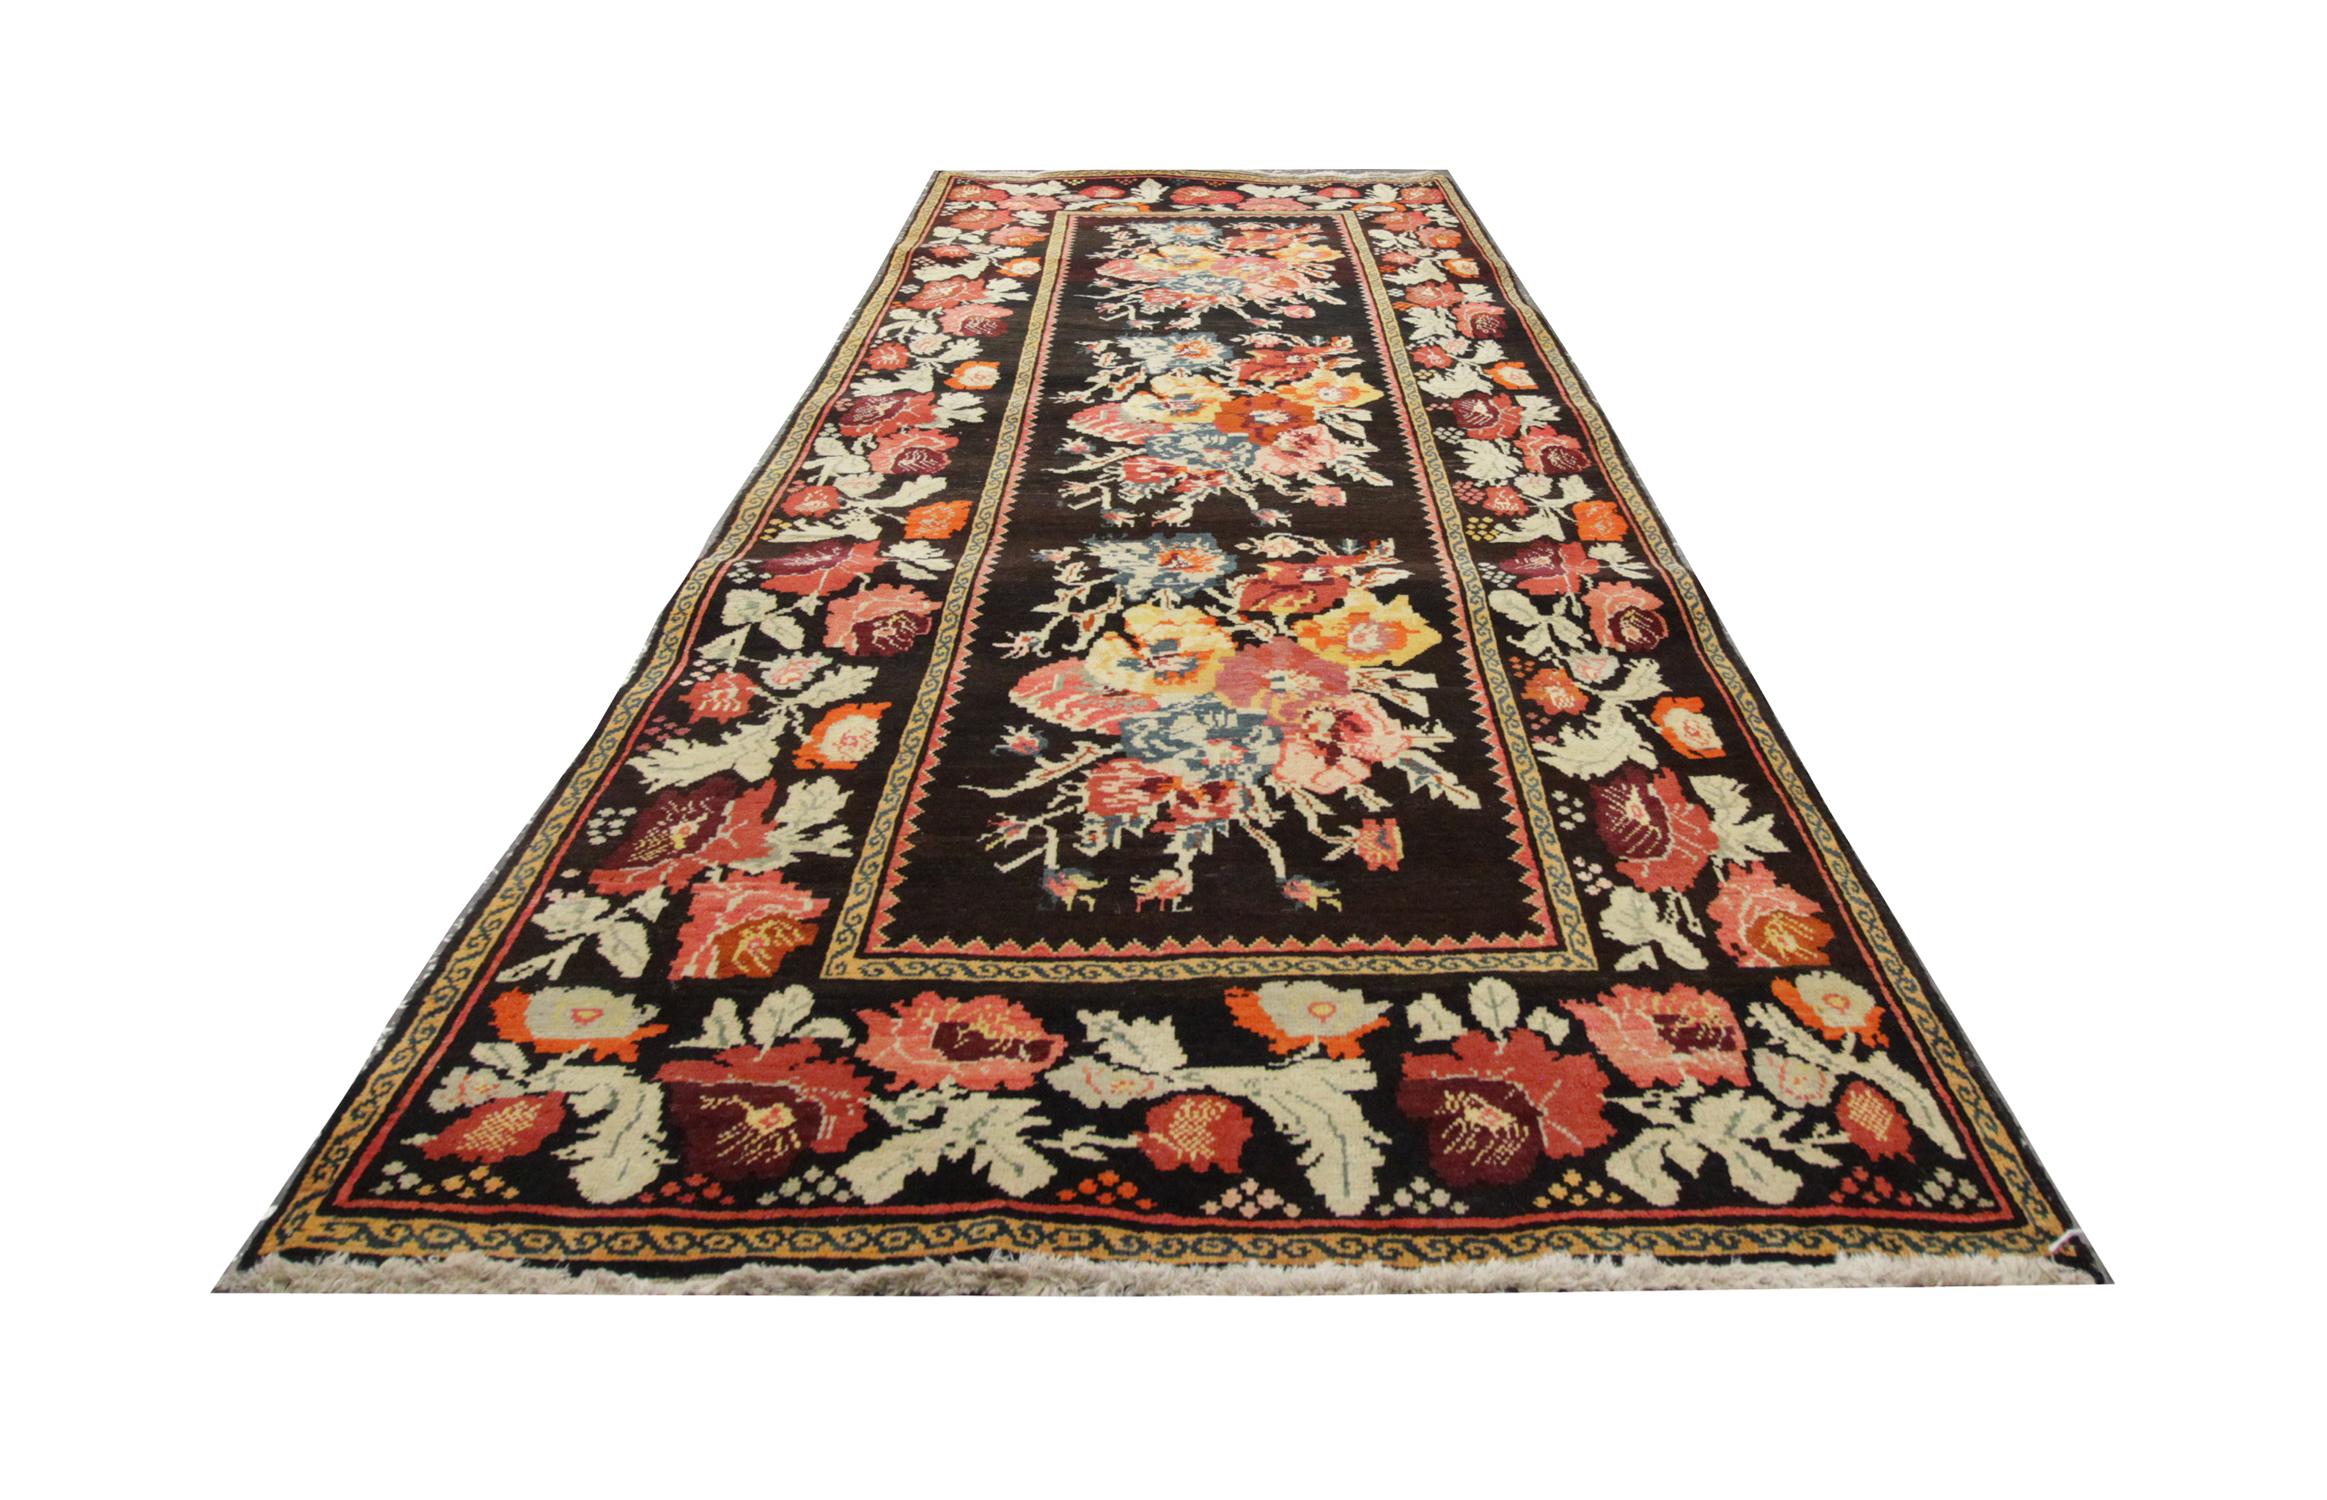 This colorful rug was handwoven and hand-dyed using traditional vegetable dye techniques in Karabagh. Using only the highest quality wool and cotton this handmade rug has light blue, orange, grey, white, pink and red colors in a pattern across the